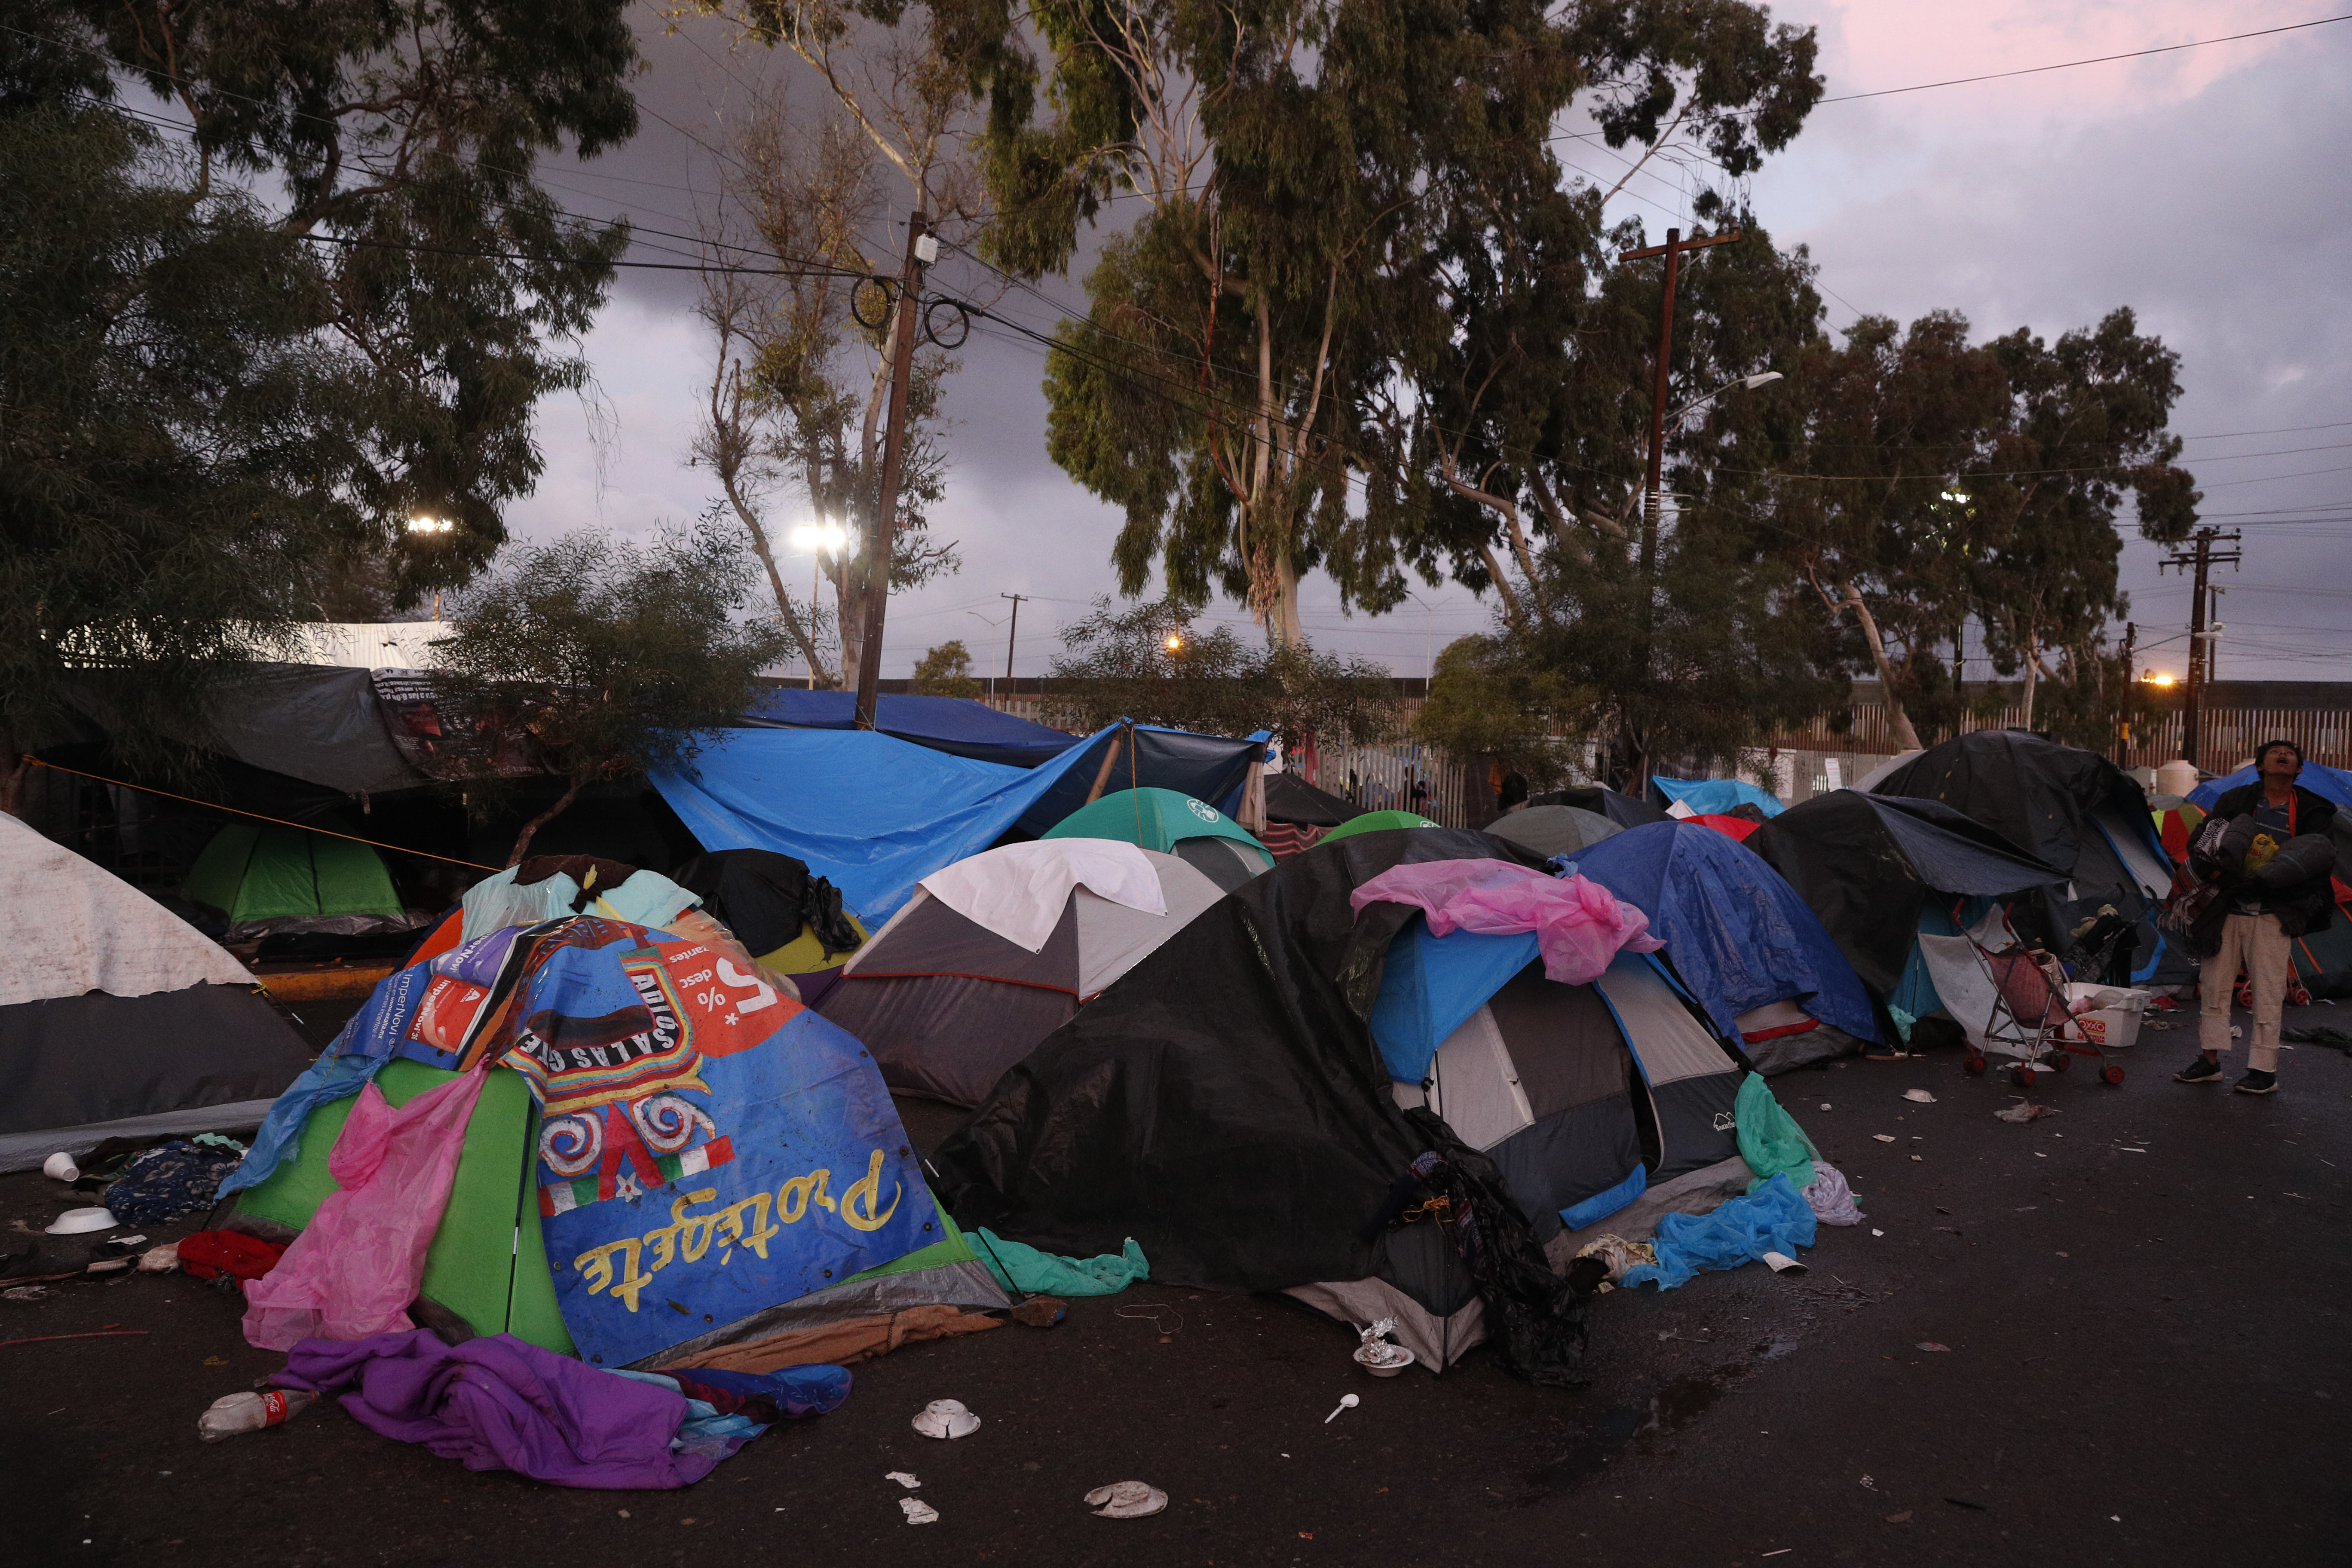 People sleep in tents on a wet street as dawn breaks, outside the Benito Juarez sports complex where thousands of migrants were camping out, in Tijuana, Mexico, Friday, Nov. 30, 2018. Authorities in the Mexican city of Tijuana have begun moving some of more than 6,000 Central American migrants from an overcrowded shelter on the border to an events hall further away.(AP Photo/Rebecca Blackwell)